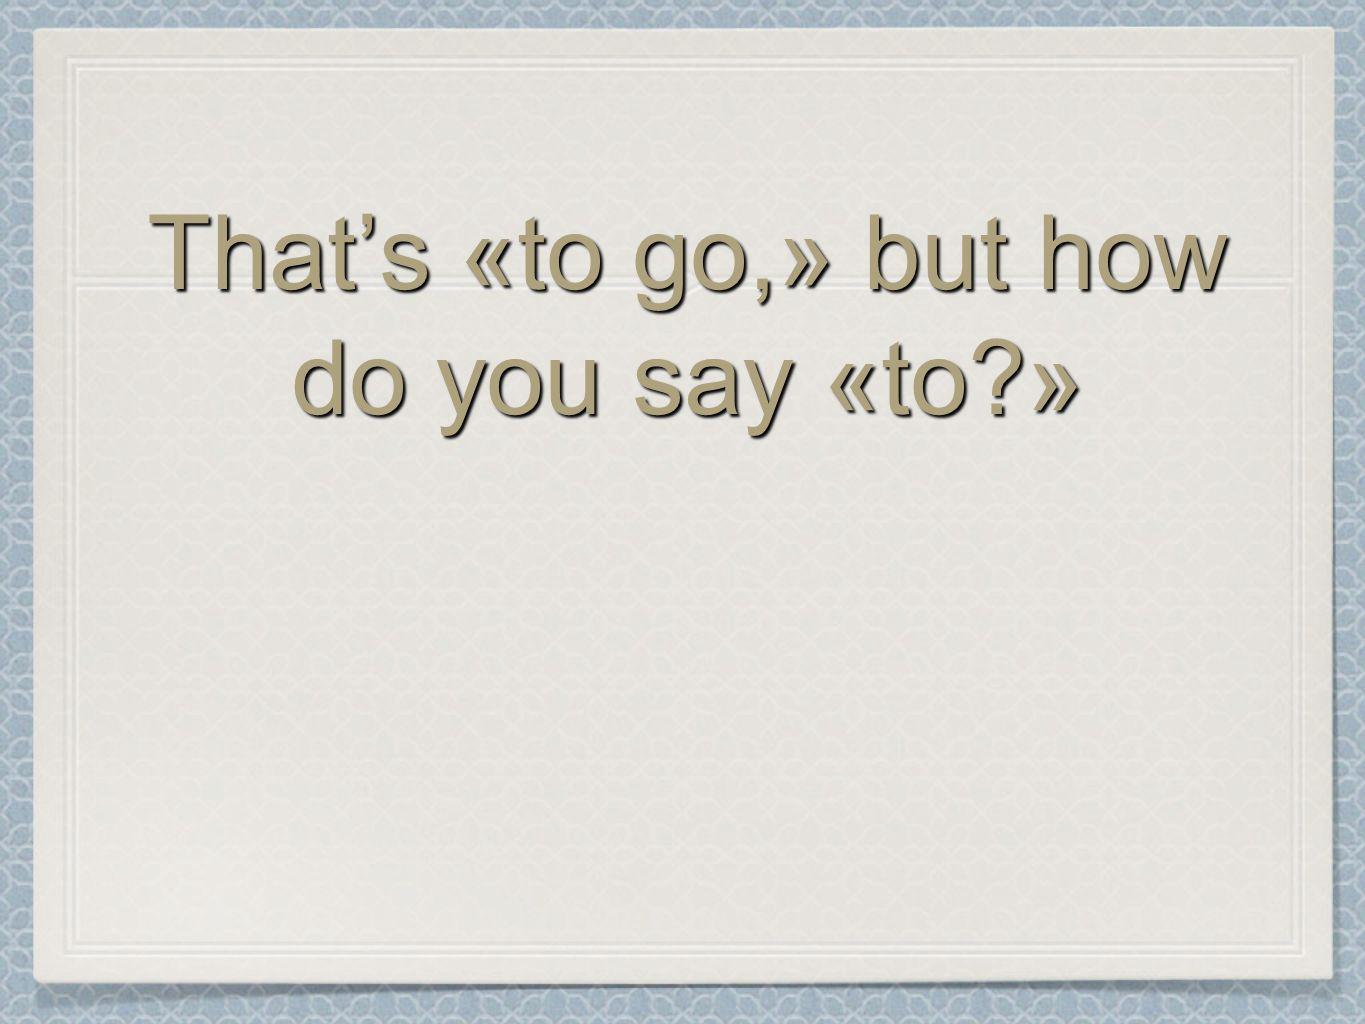 Thats «to go,» but how do you say «to »